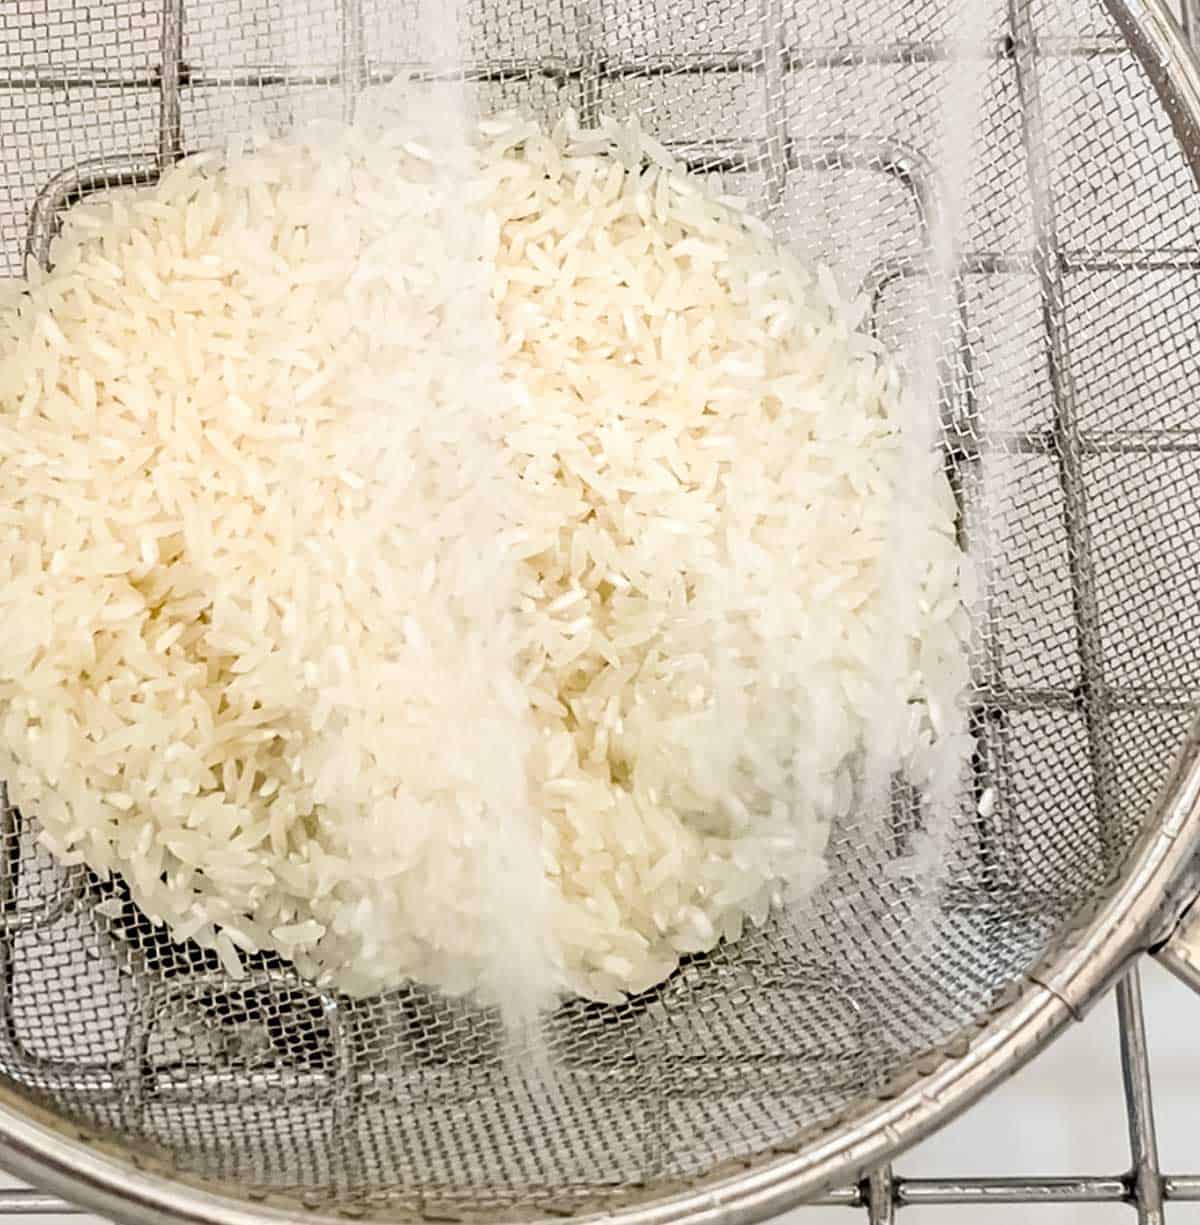 Rice in a mesh strainer being rinsed in the sink